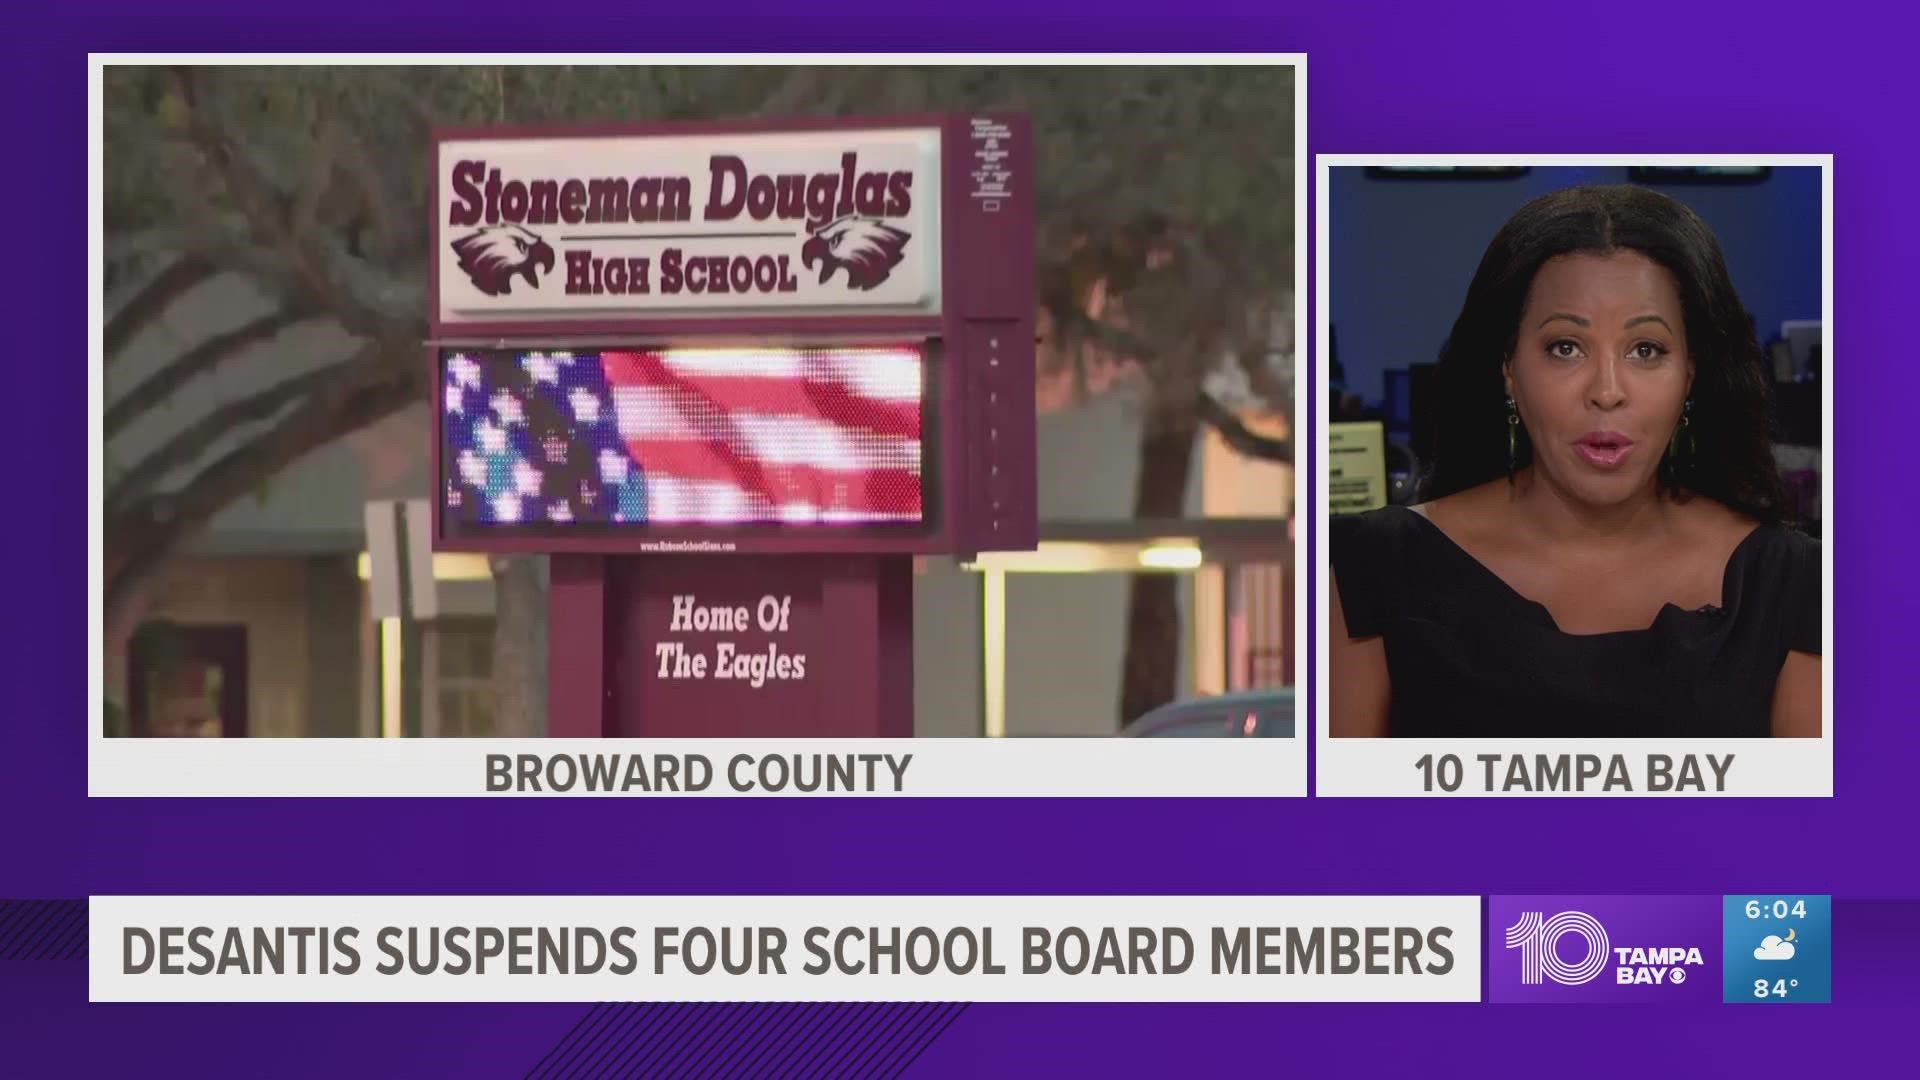 The suspended school board members were accused of "neglect of duty" and "misuse of authority".